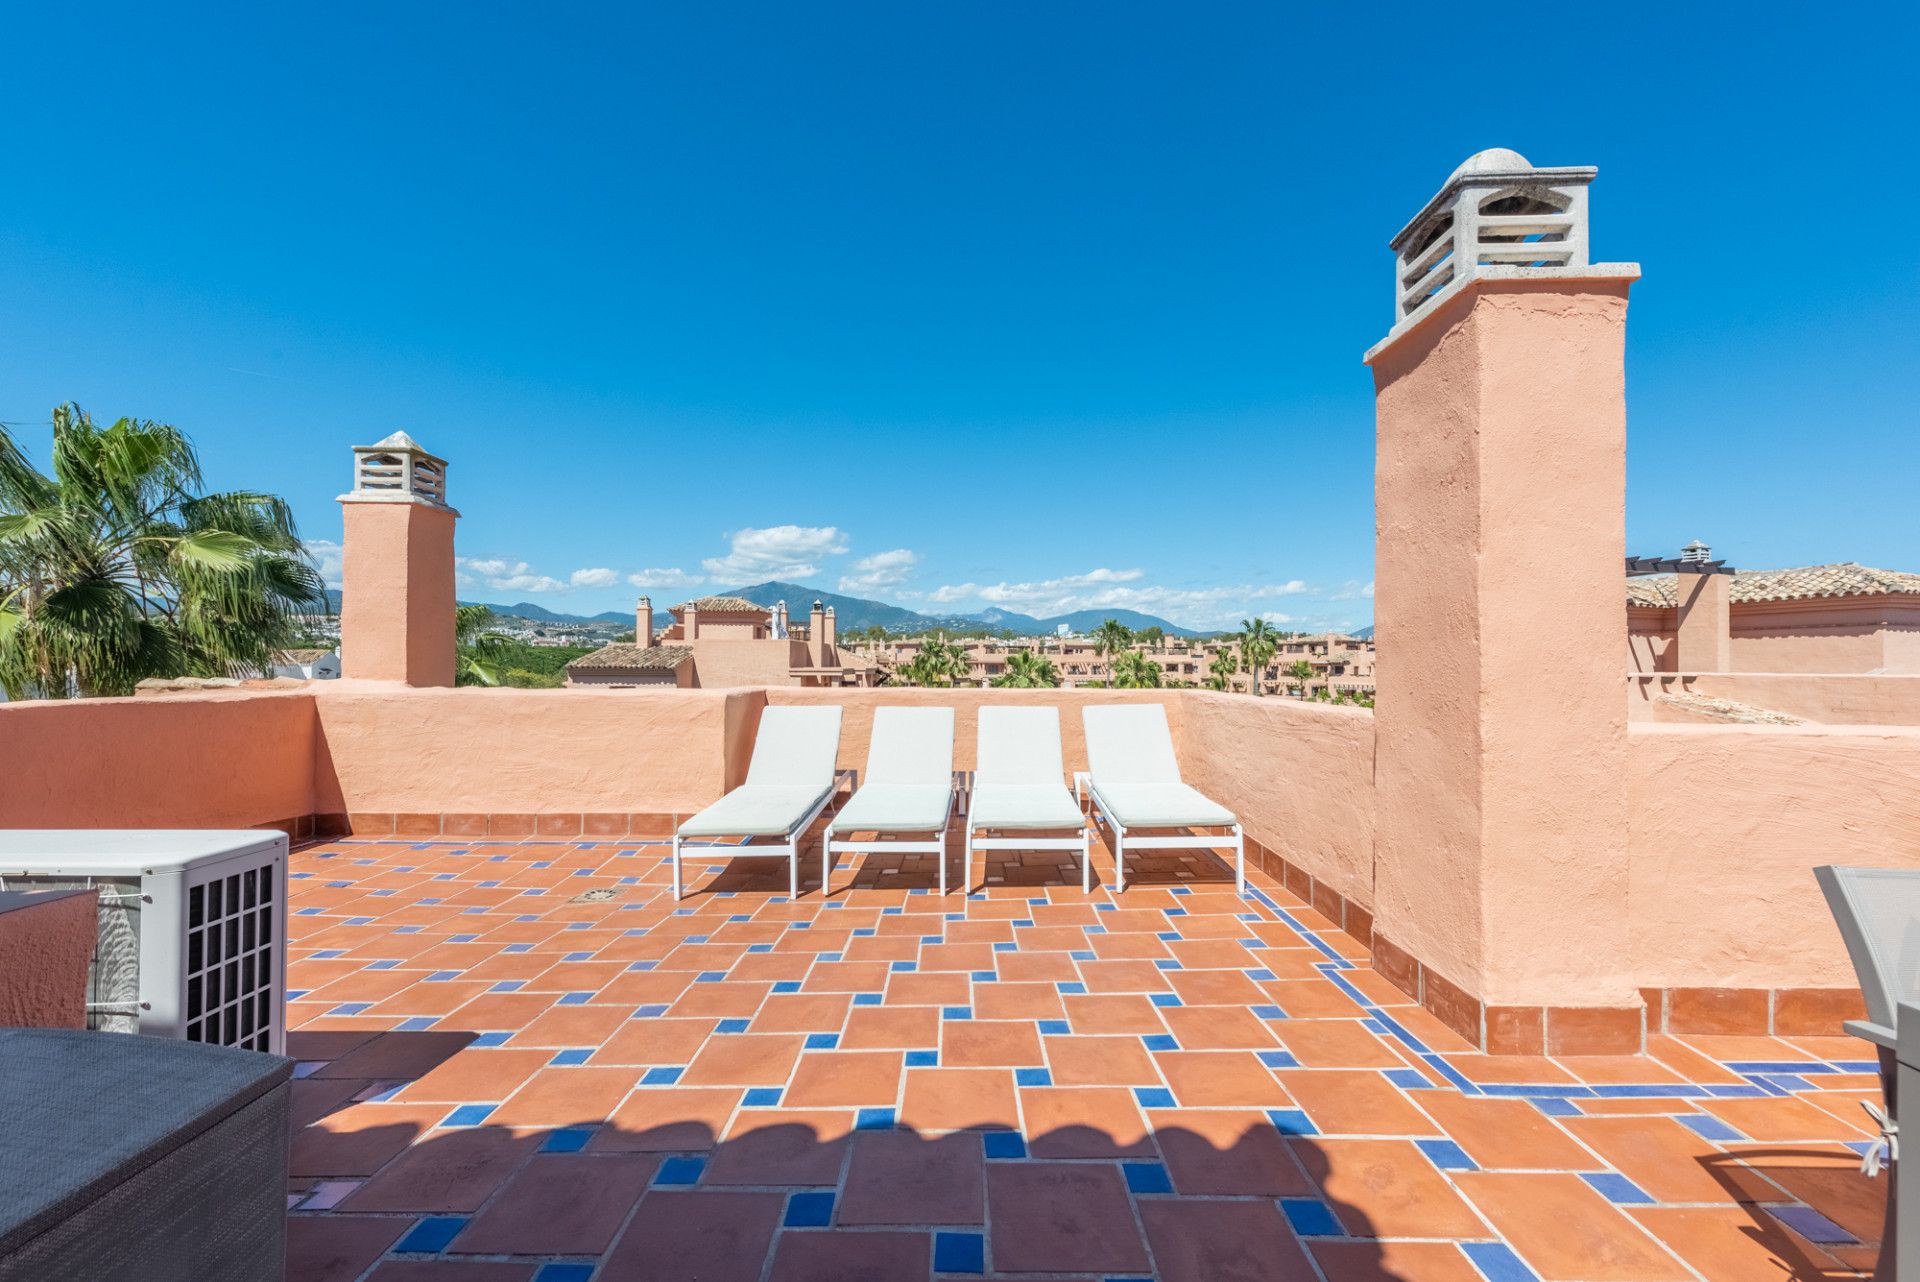 Great duplex penthouse in Hacienda del Sol, 200 meters from the beach!